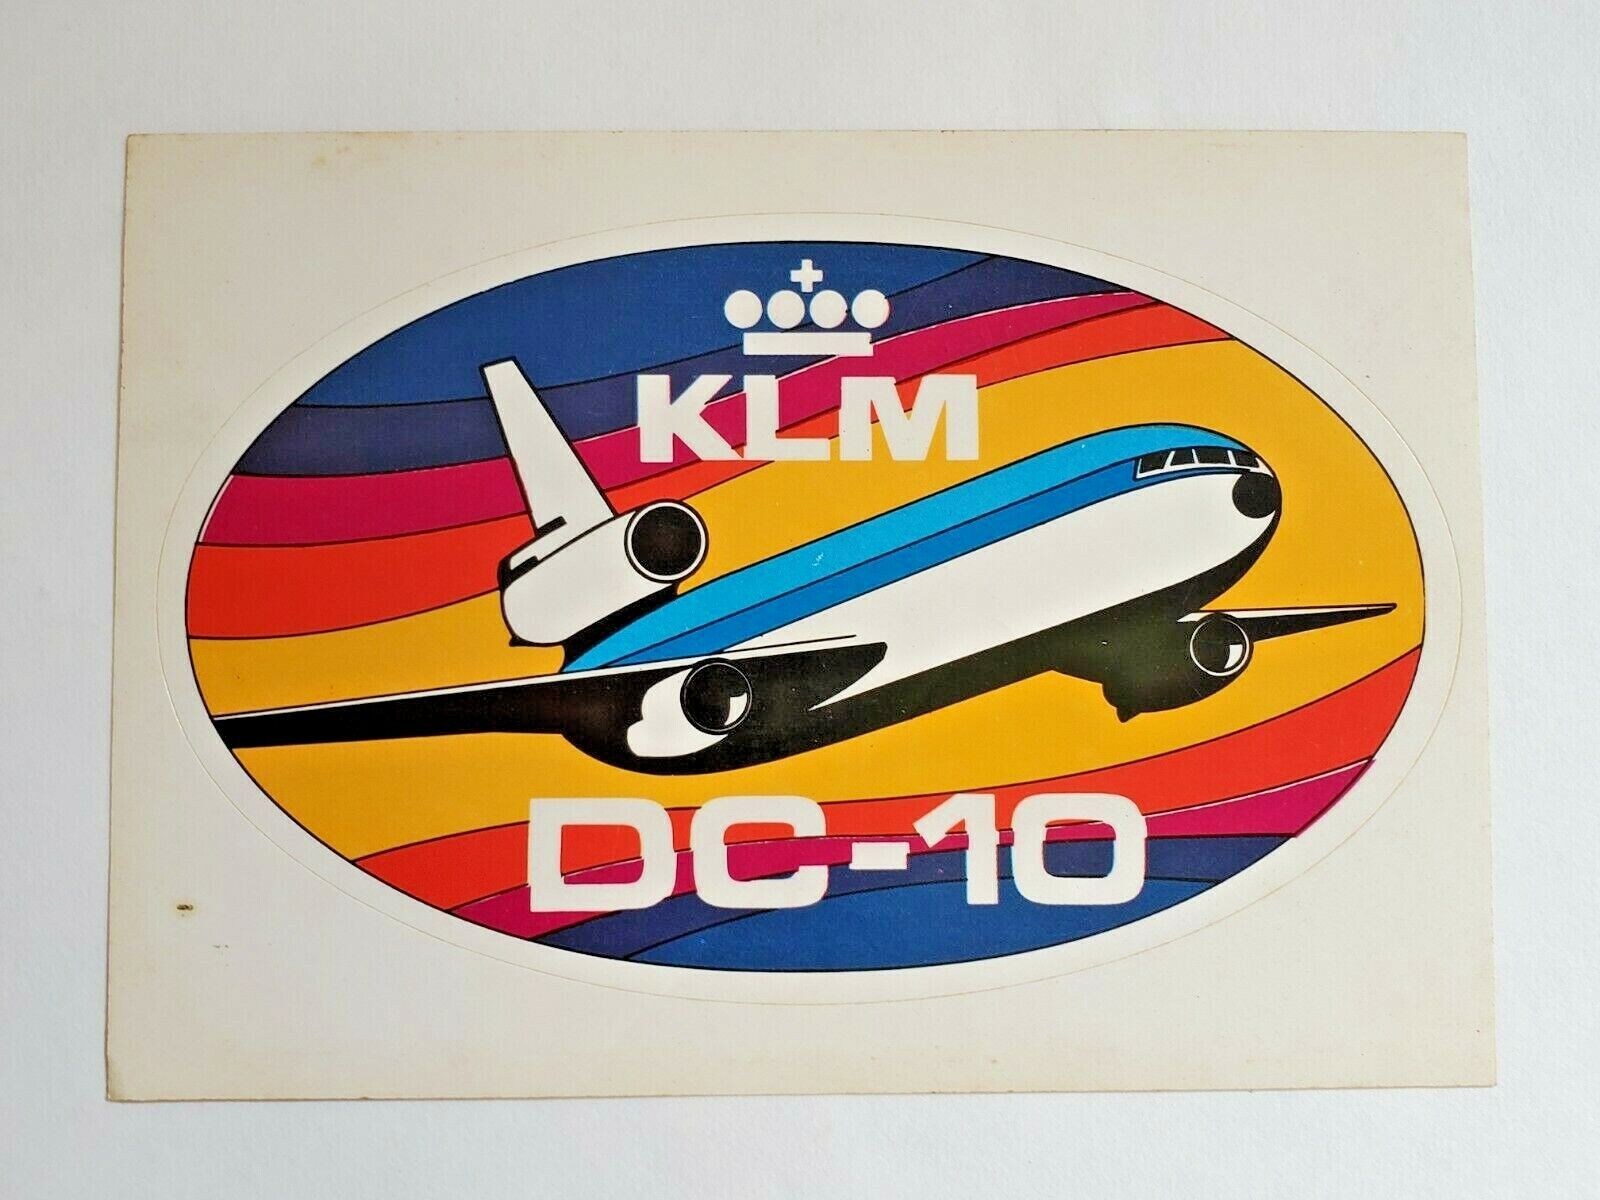 KLM AIRLINES DC-10 30 COMBO POSTCARD AND STICKER